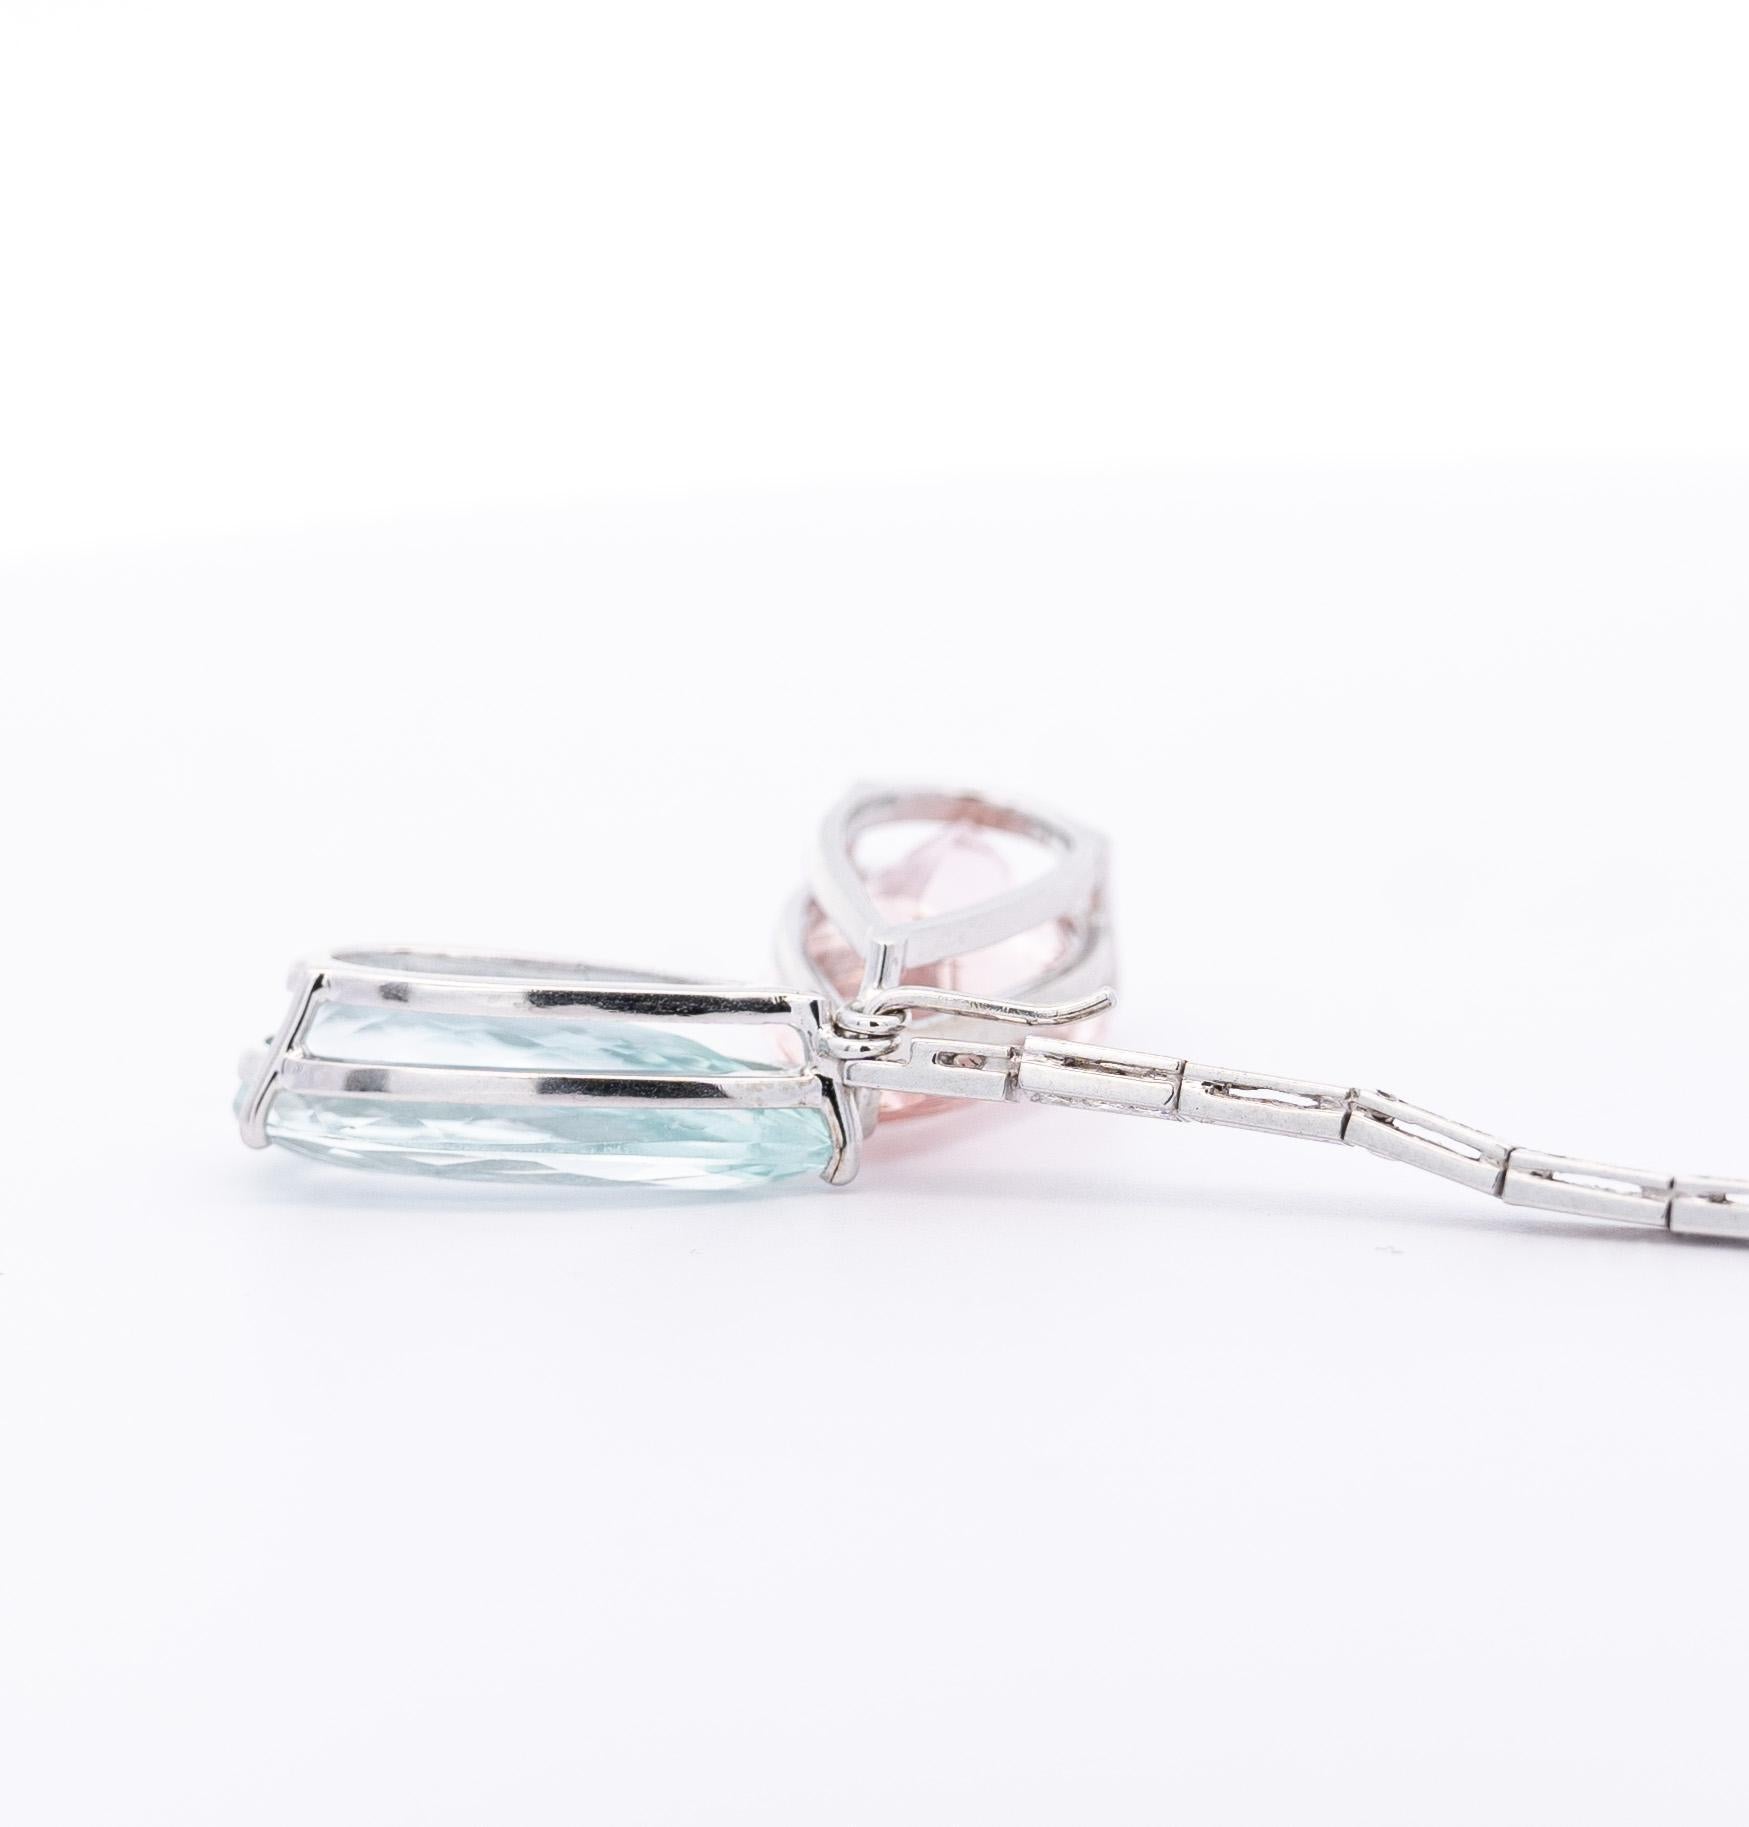 Vintage Aquamarine, Kunzite & Diamond Detachable Mix/Match Earrings. 

Mix/match detachable dangle drop earrings, featuring 26CTTW of pastel pink pear shaped Kunzite and pastel blue aquamarine. The length of the earrings is adorned with 48 round-cut